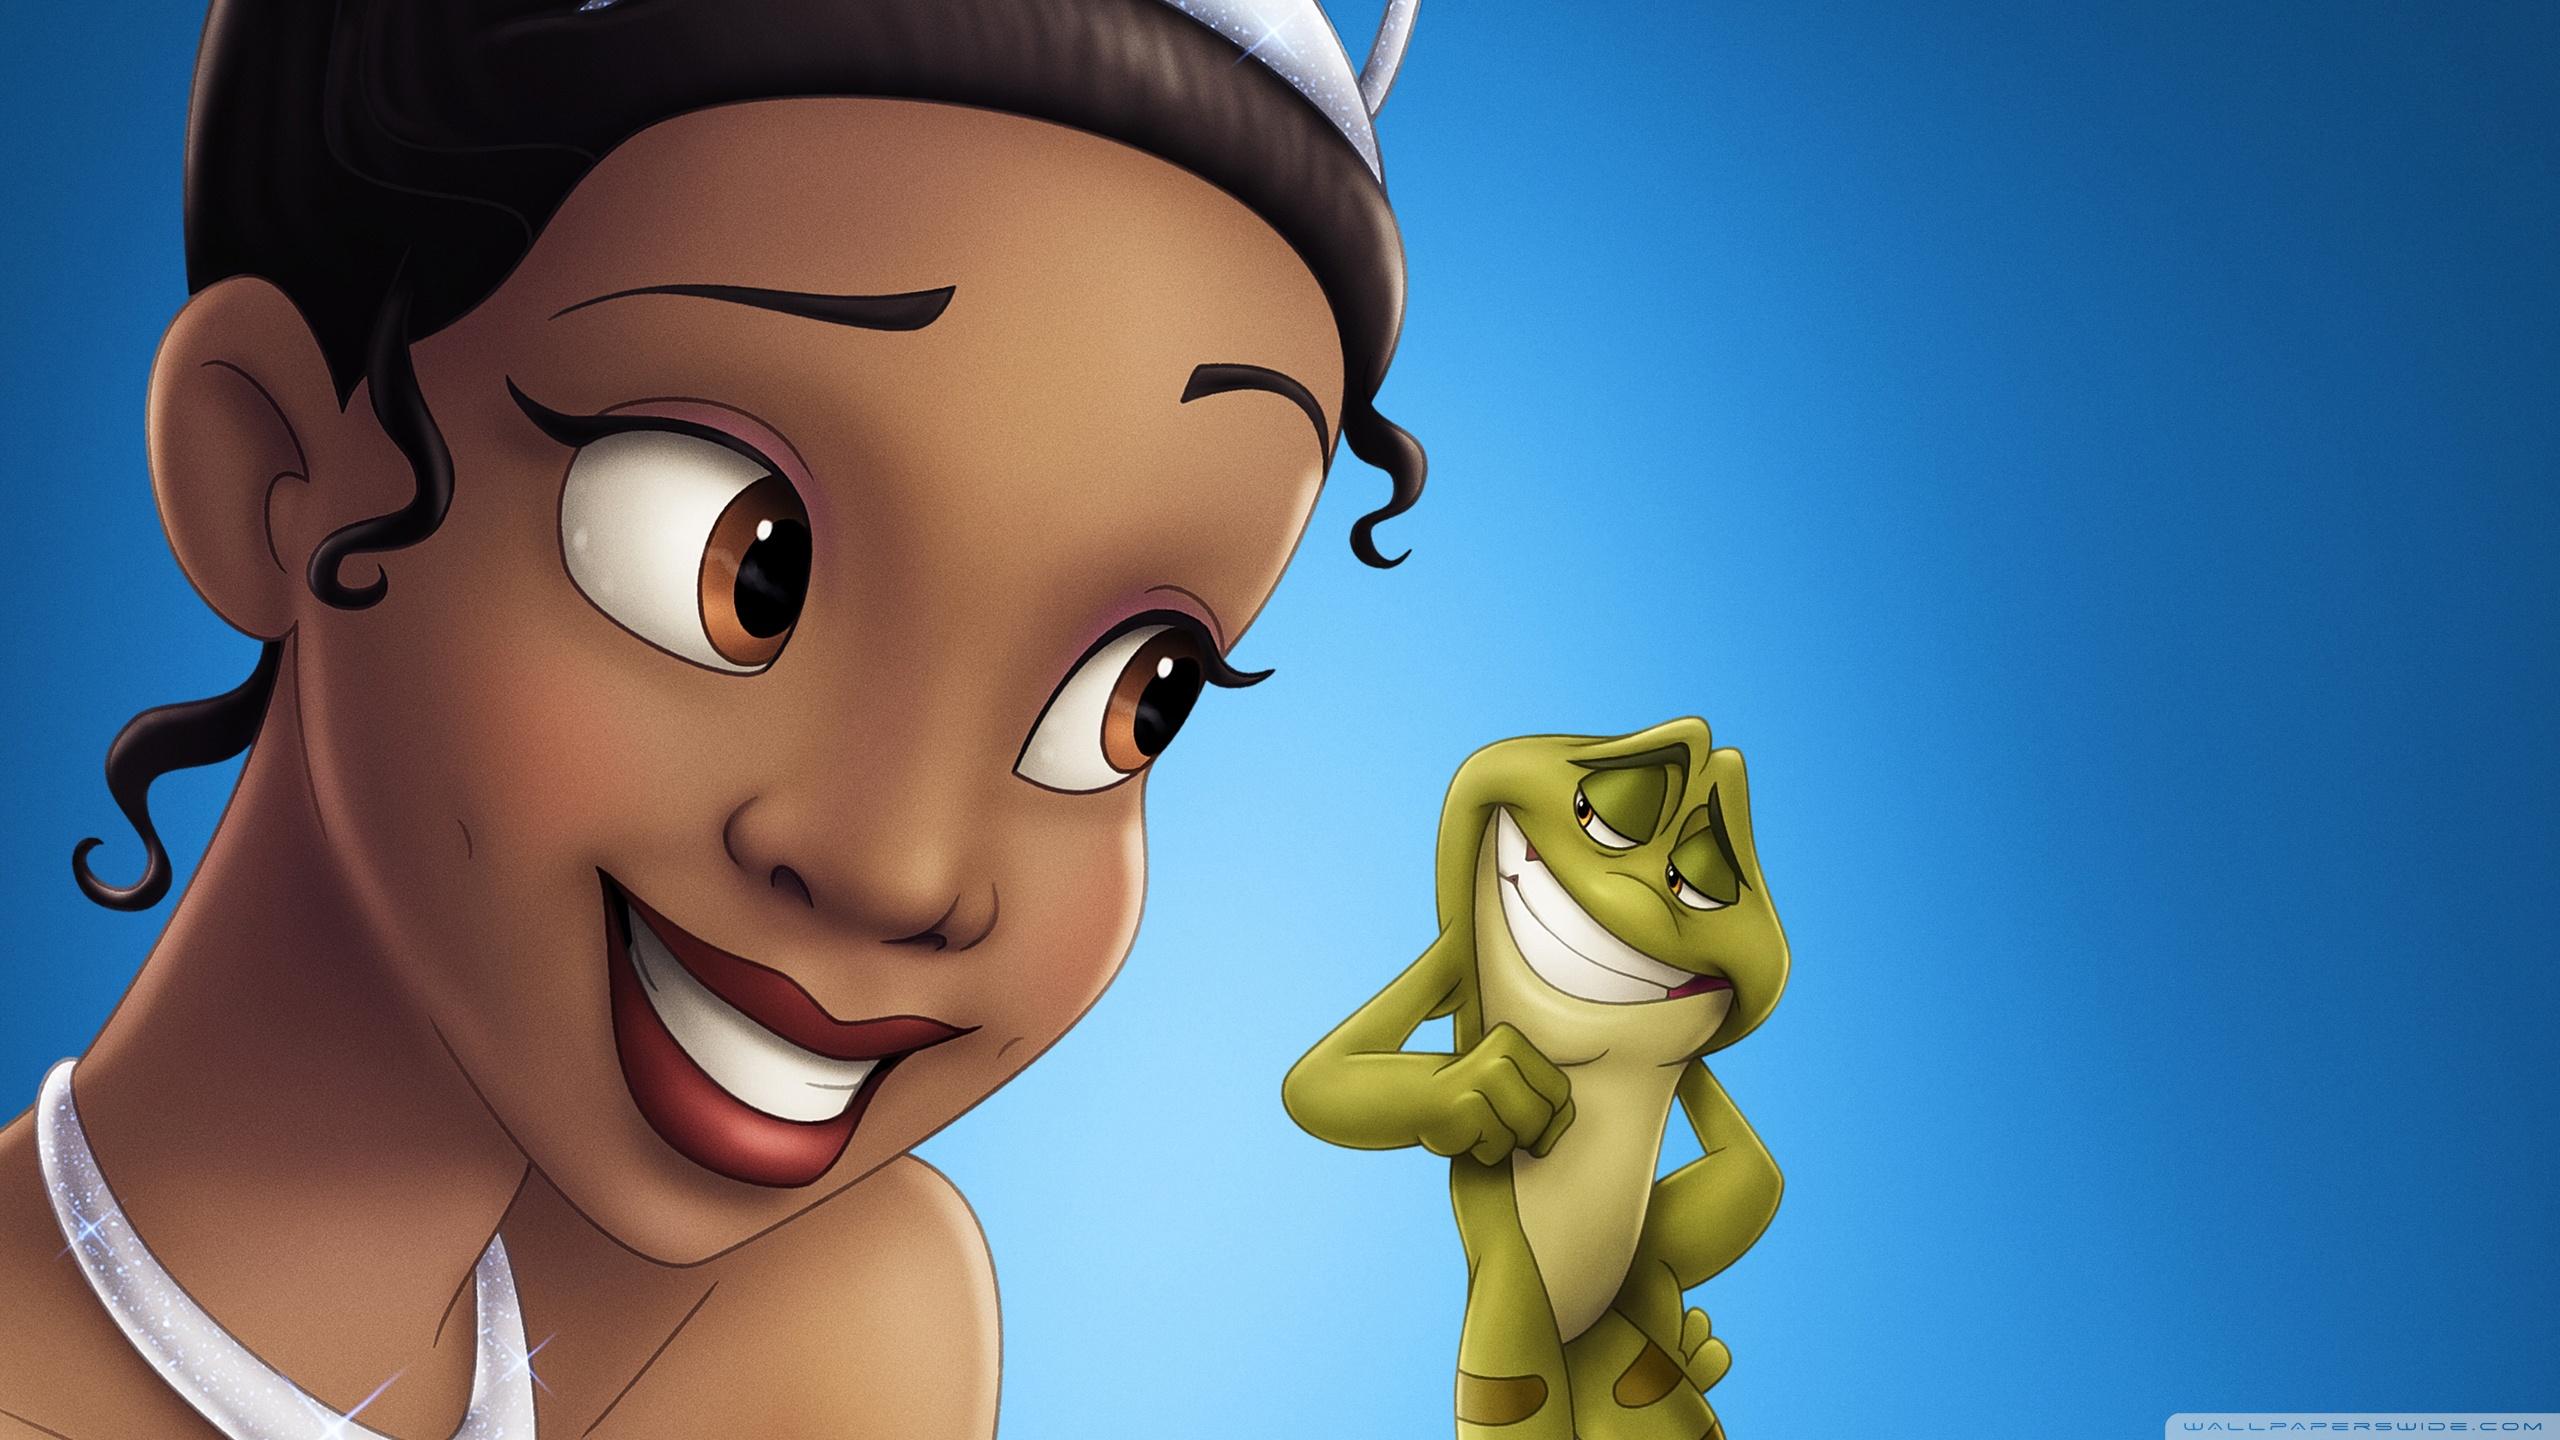 The Princess And The Frog ❤ 4K HD Desktop Wallpaper for 4K Ultra HD